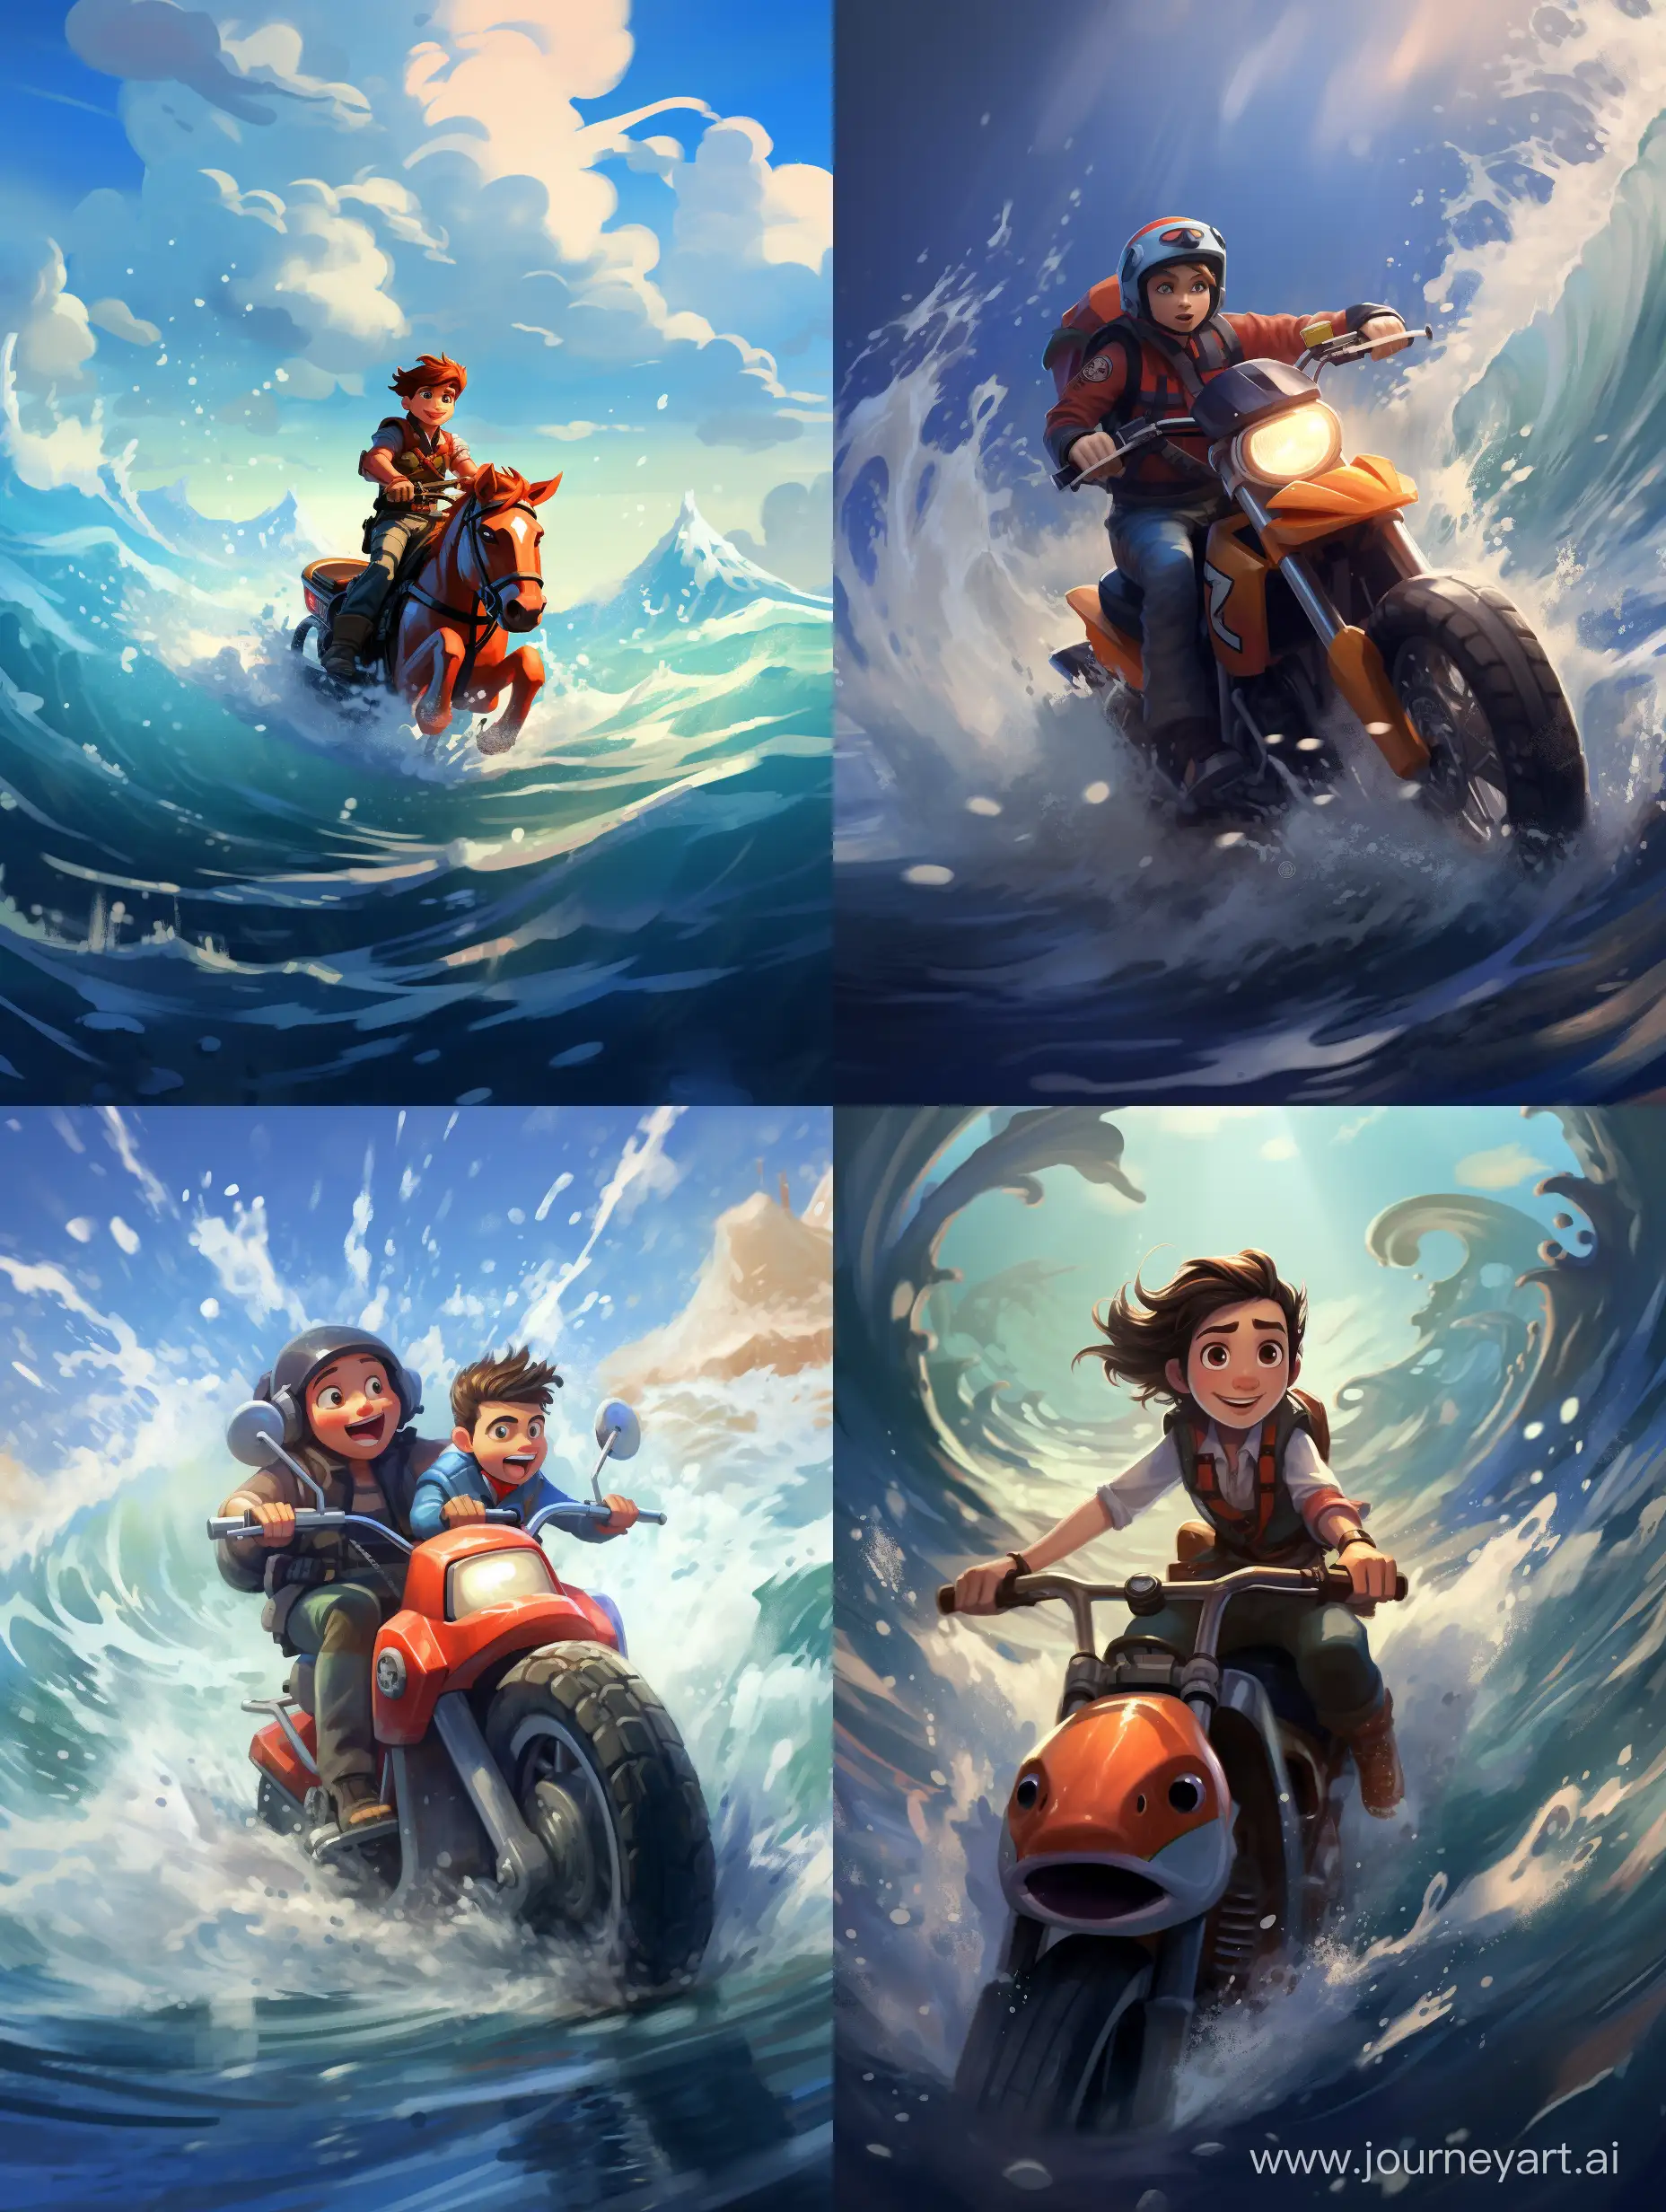 Thrilling-Adventure-Riding-the-Rough-Waters-in-Pixar-Style